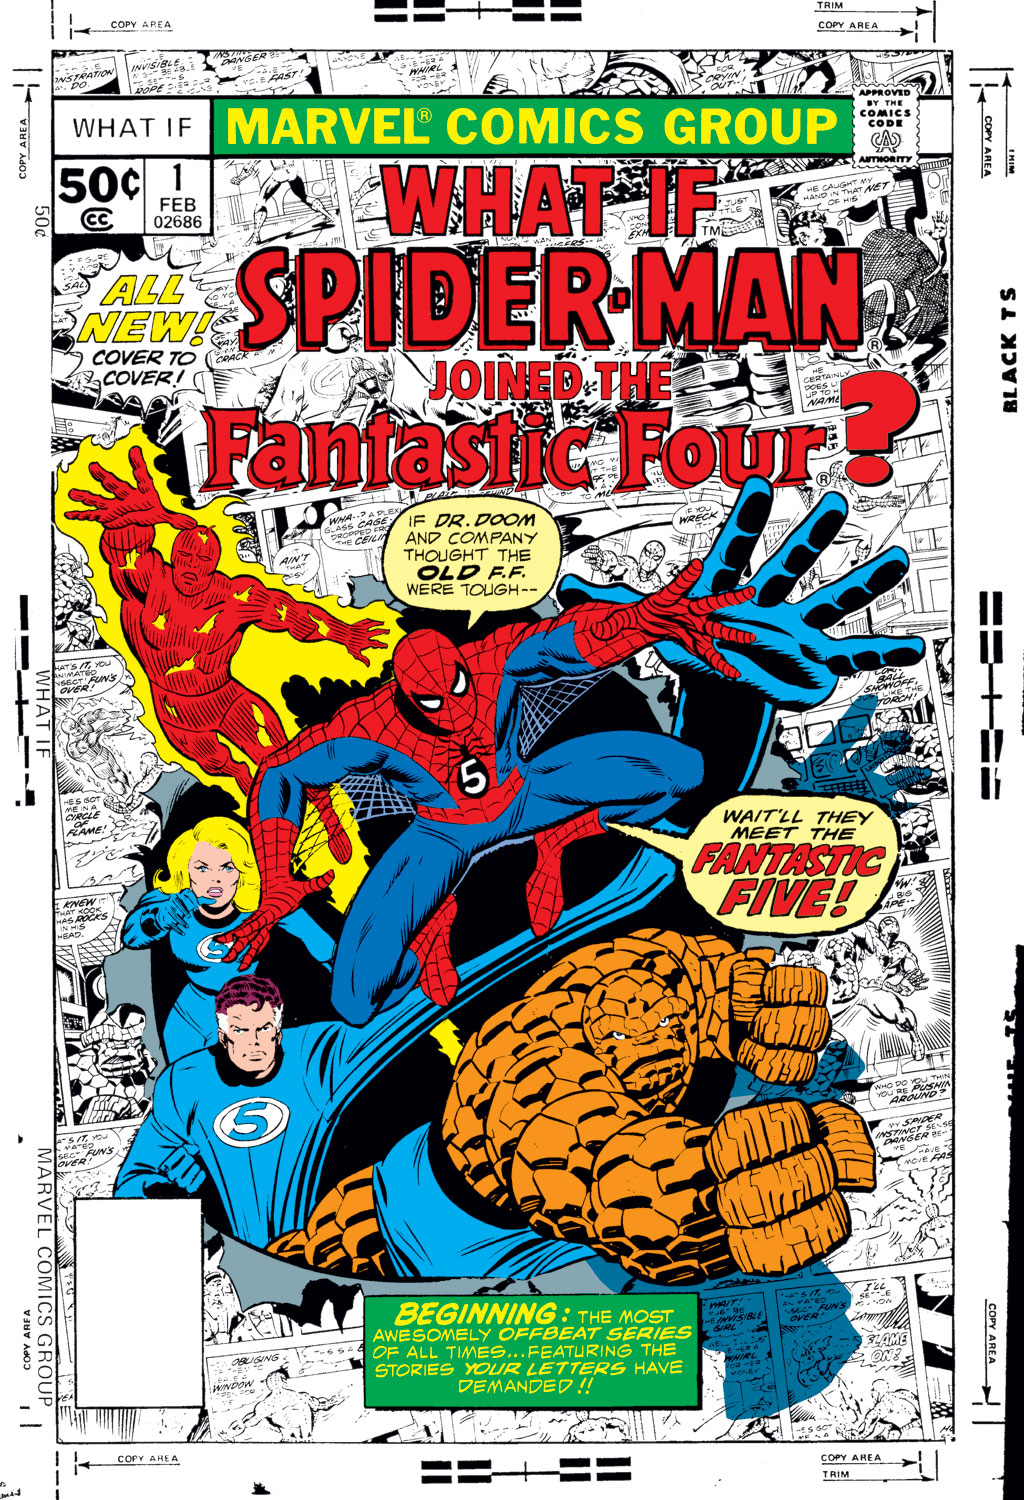 What If? (1977) issue 1 - Spider-Man joined the Fantastic Four - Page 1